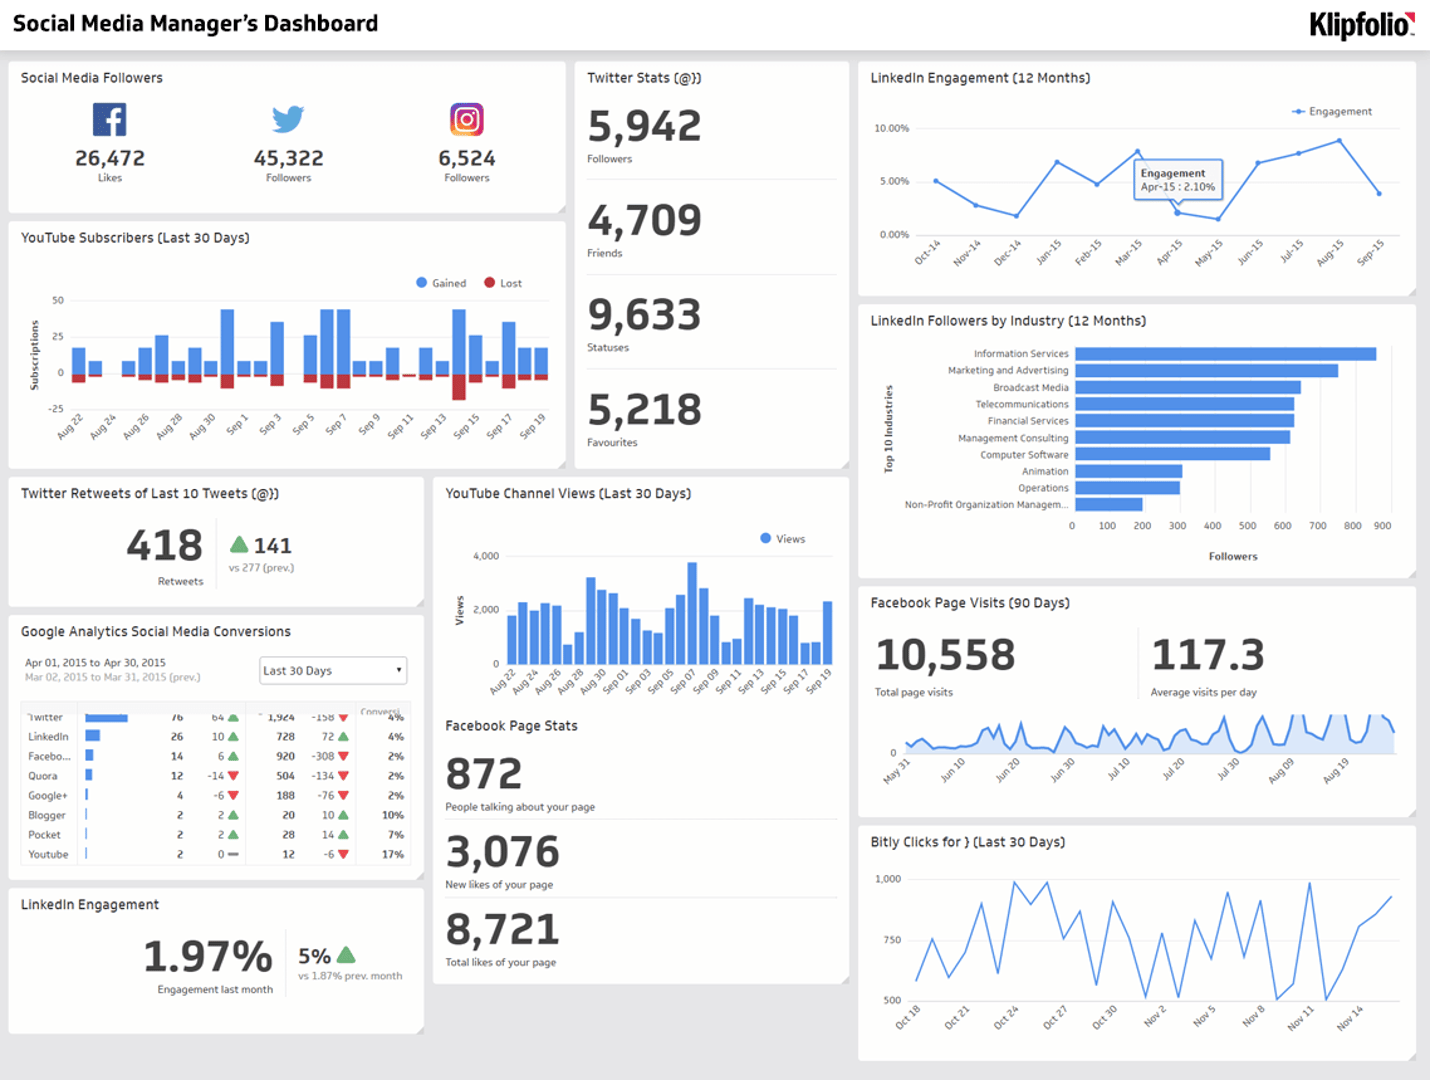 Related Dashboard Examples - Social Media Manager's Dashboard